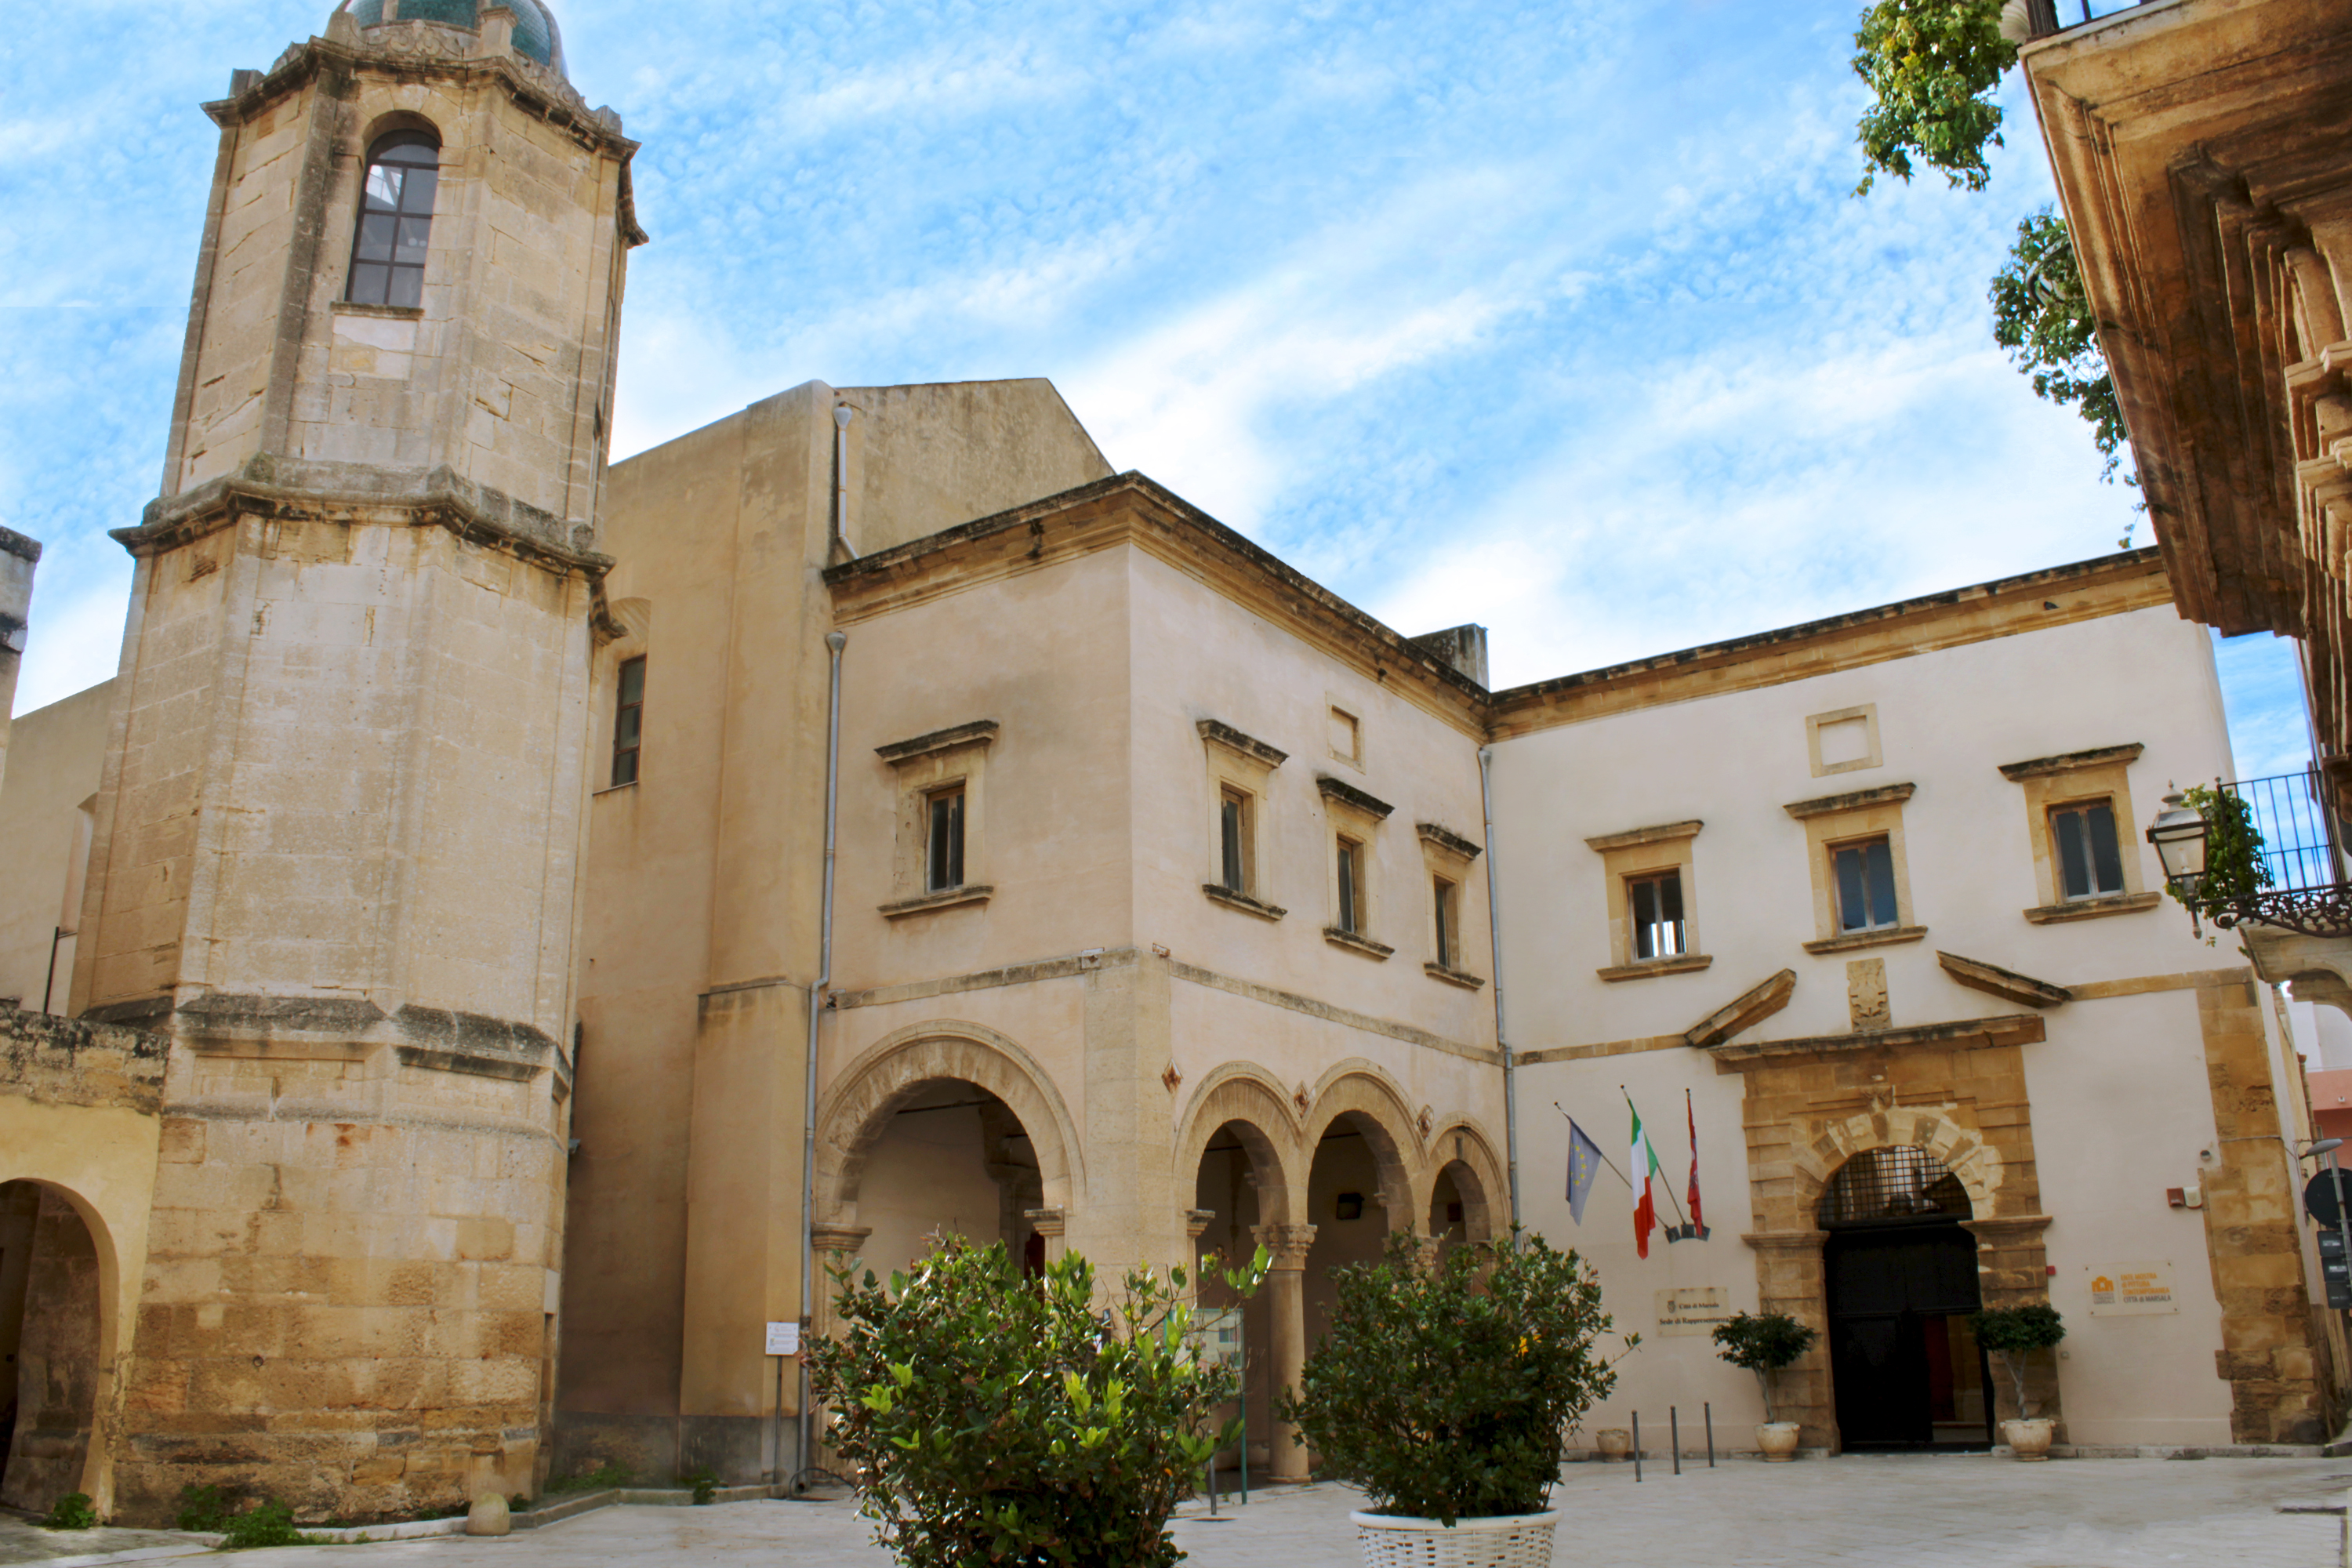 Convent of the Carmine - Municipal Art Gallery in Marsala